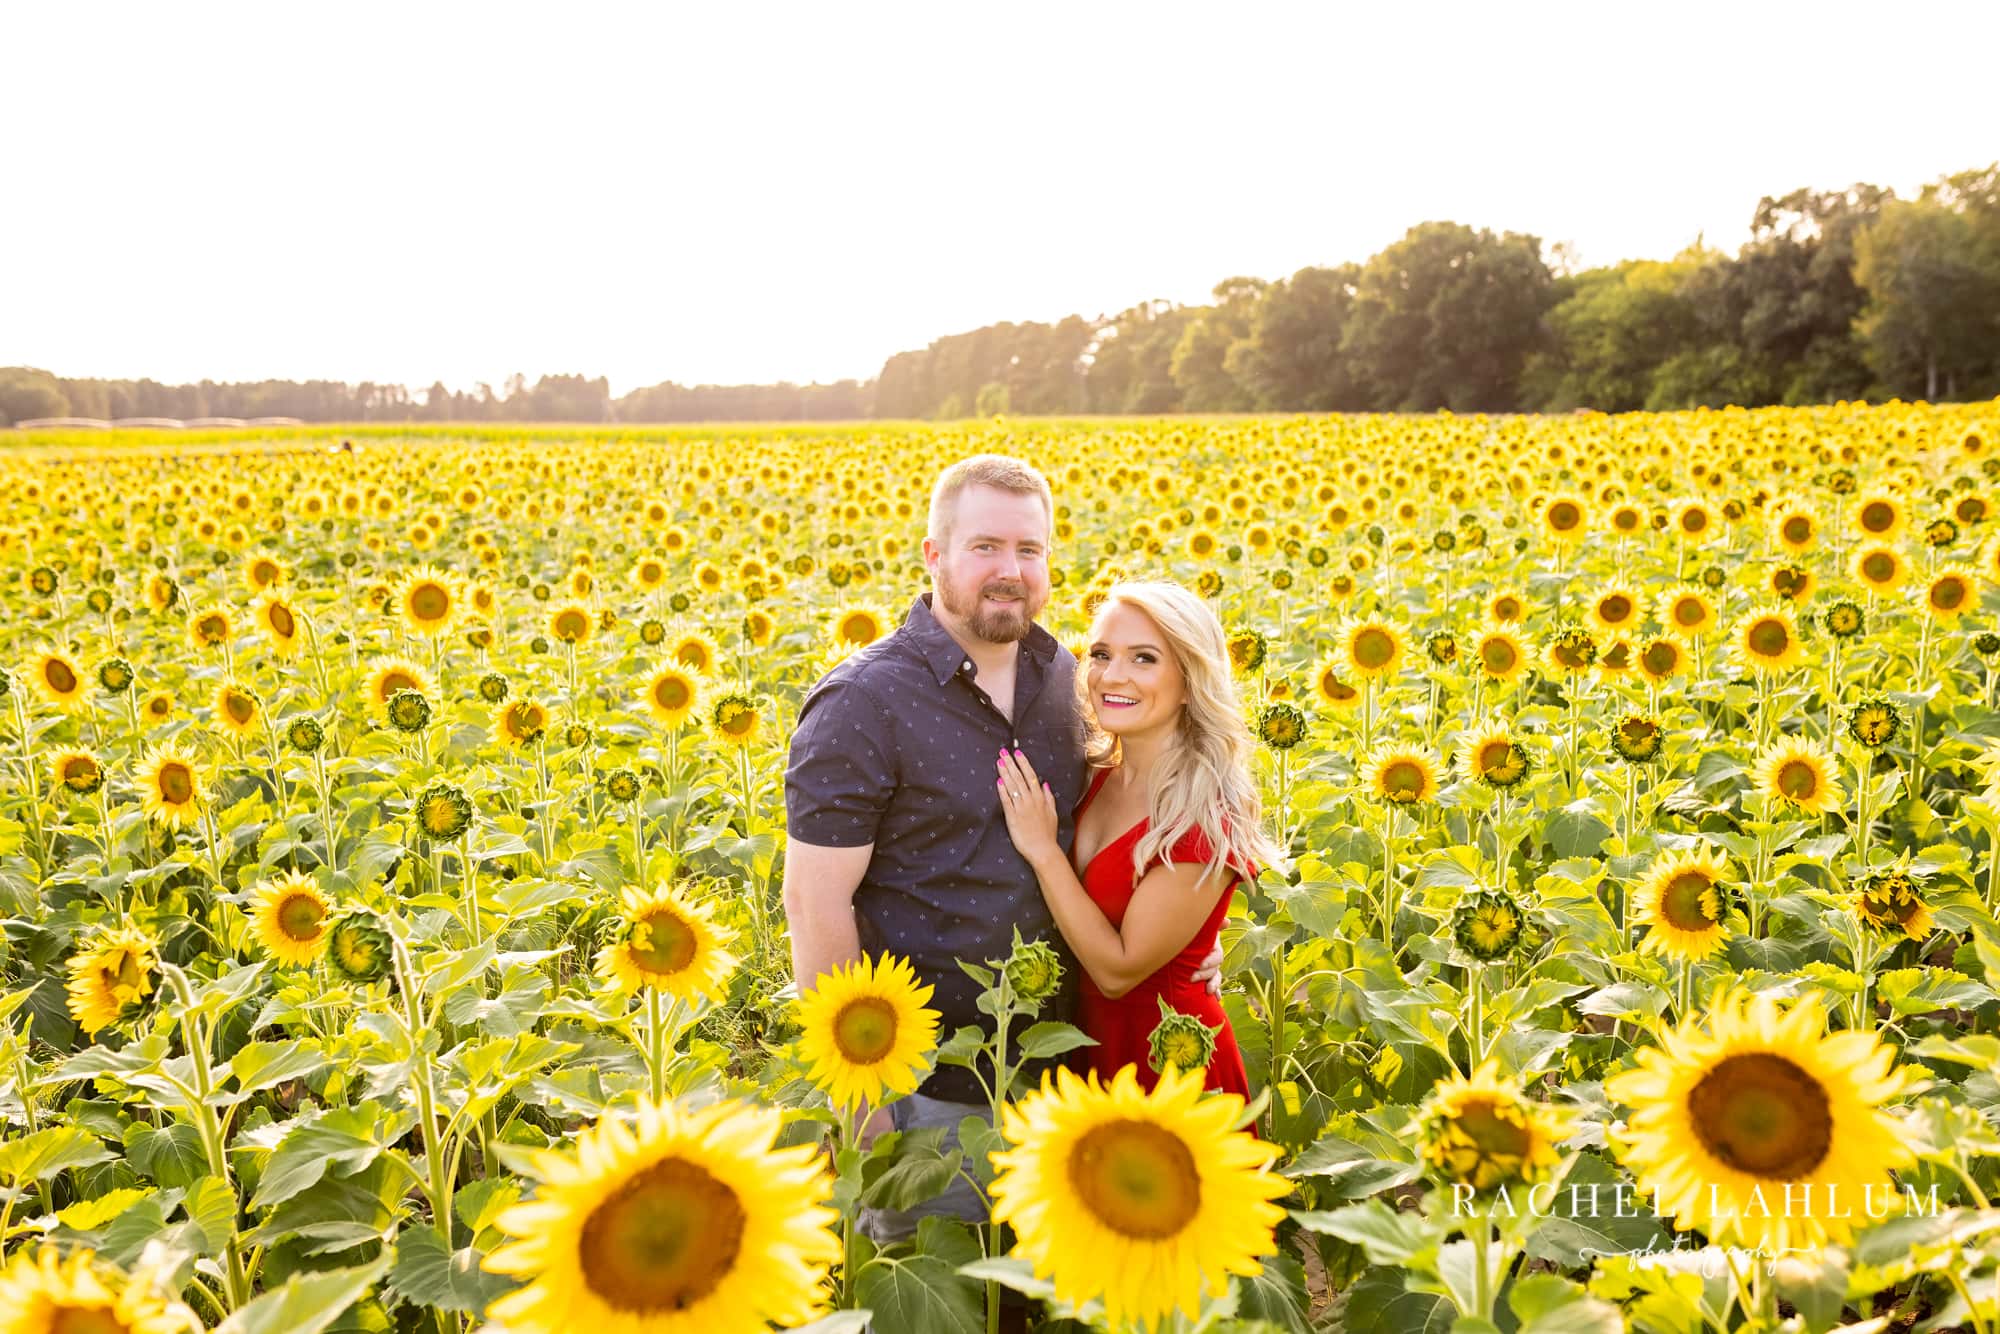 Poses in sunflower field